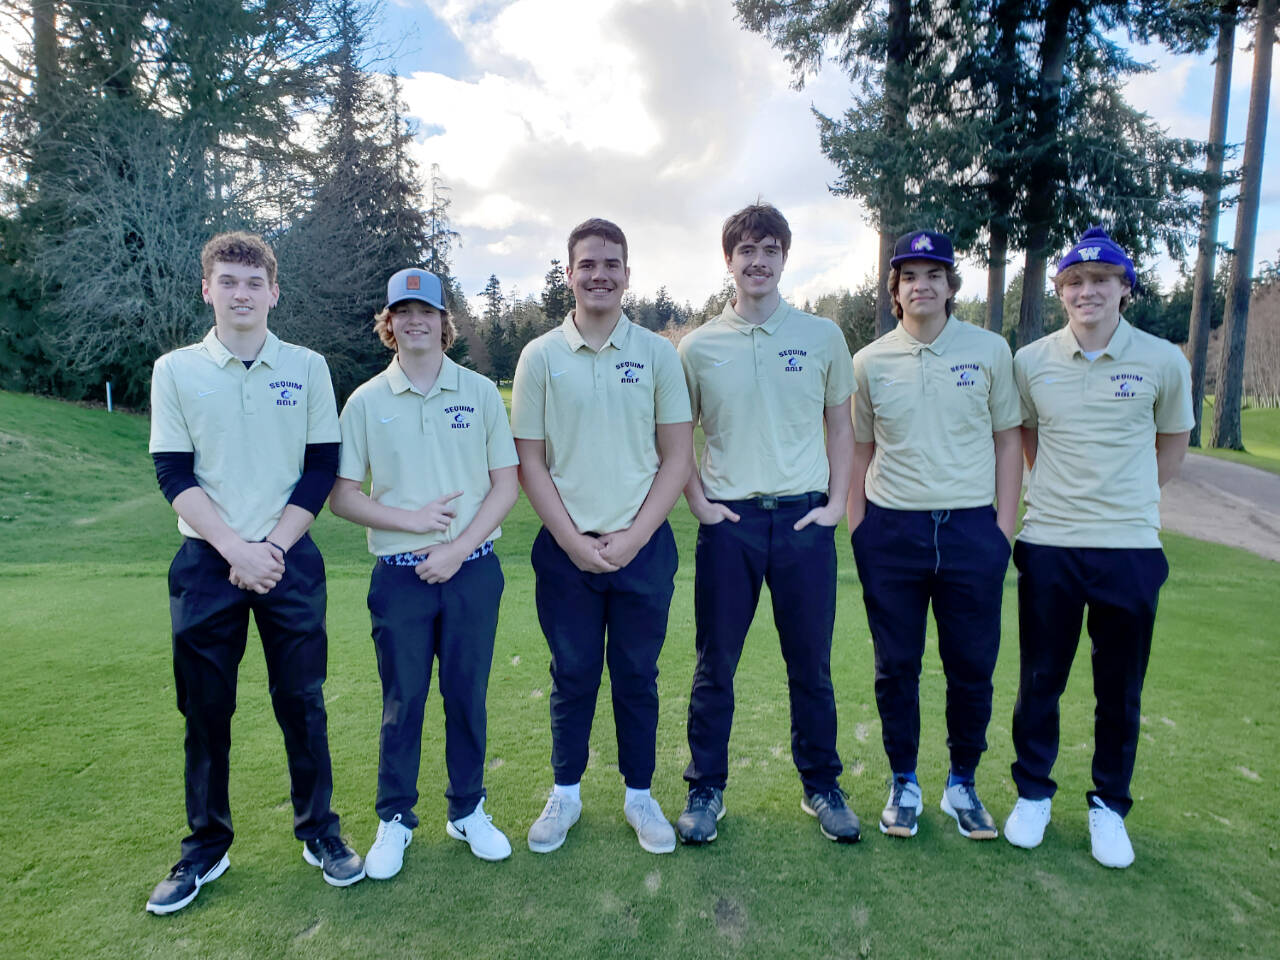 The Sequim boys golf team is the defending Olympic League state champion. The boys won their first match of the year last weekend. From left are Dominic Riccobene, Ben Sweet, Pryce Glasser, Cole Smithson, Lars Wiker and Zack Thompson. (Photo courtesy of Sean O’Mera)